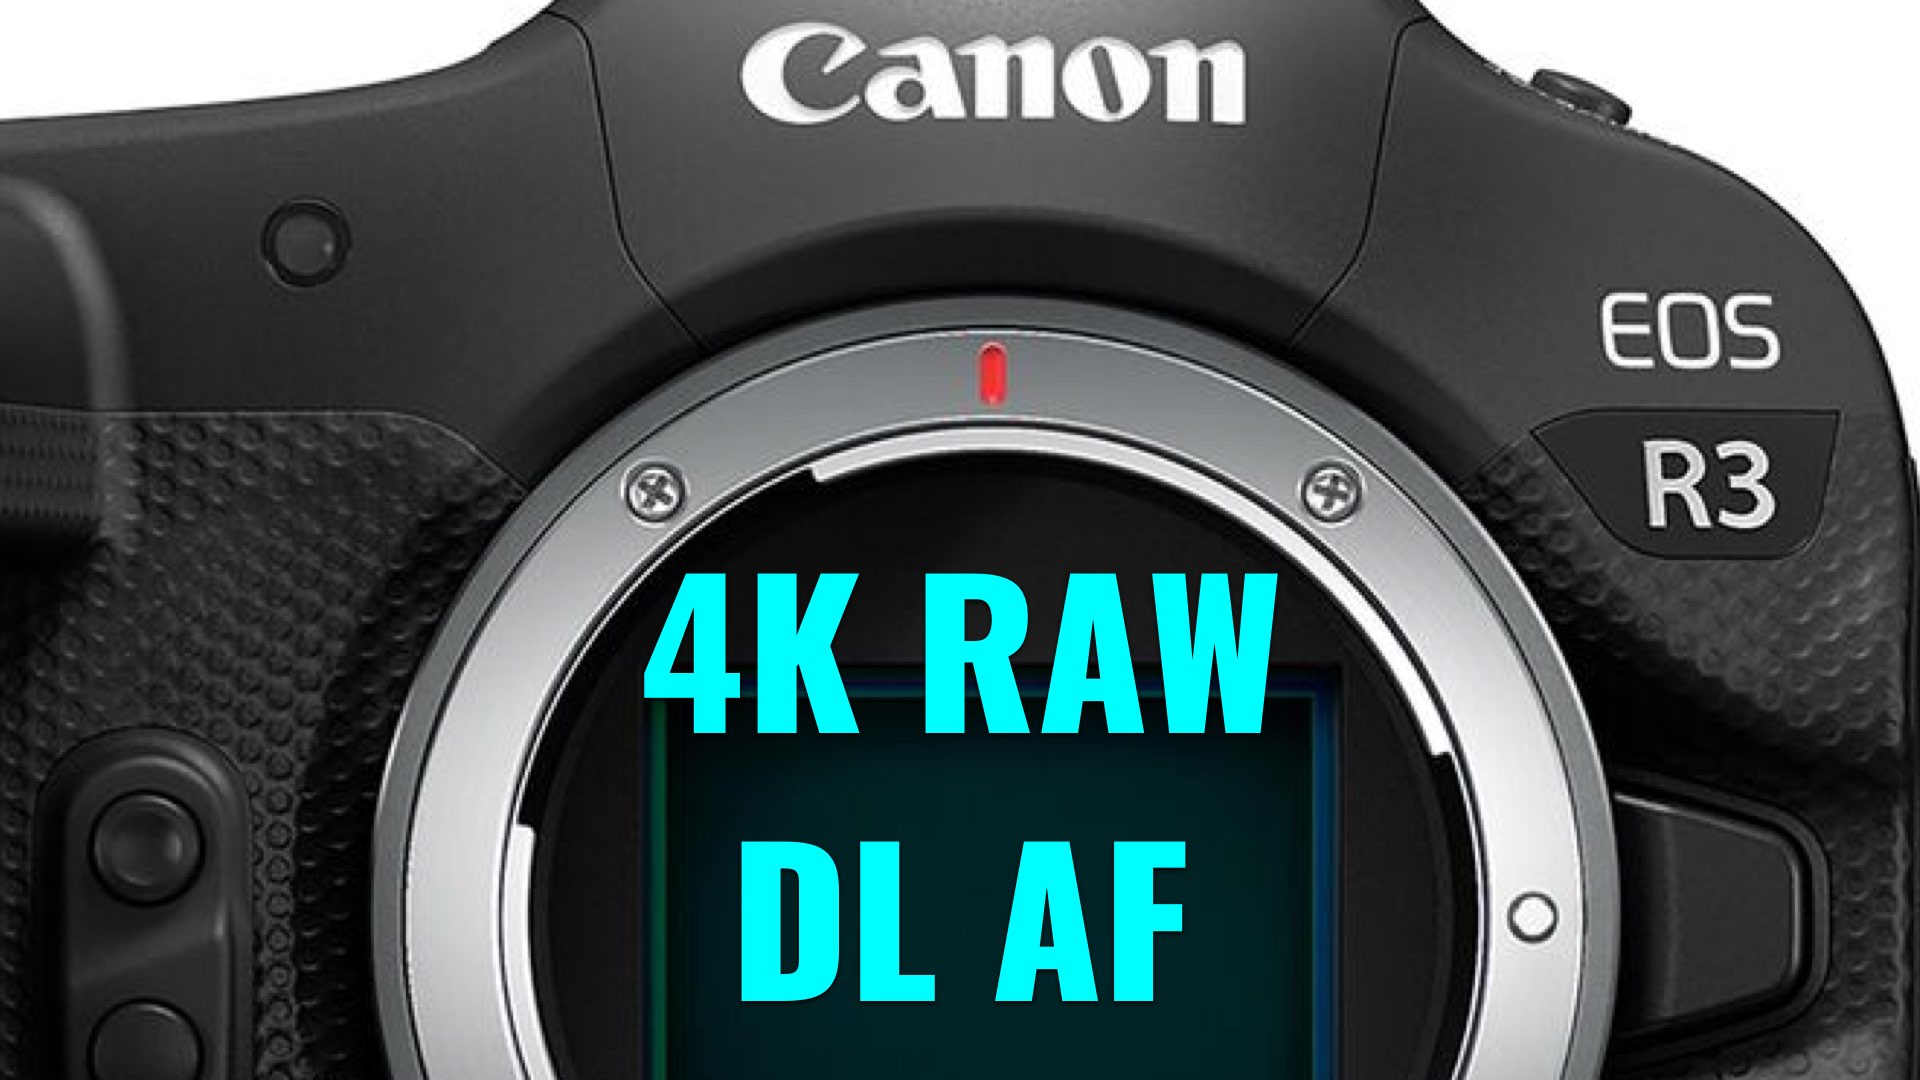 Canon EOS R3 Update: Internal 4K RAW, and Deep-Learning Super-Fast AF